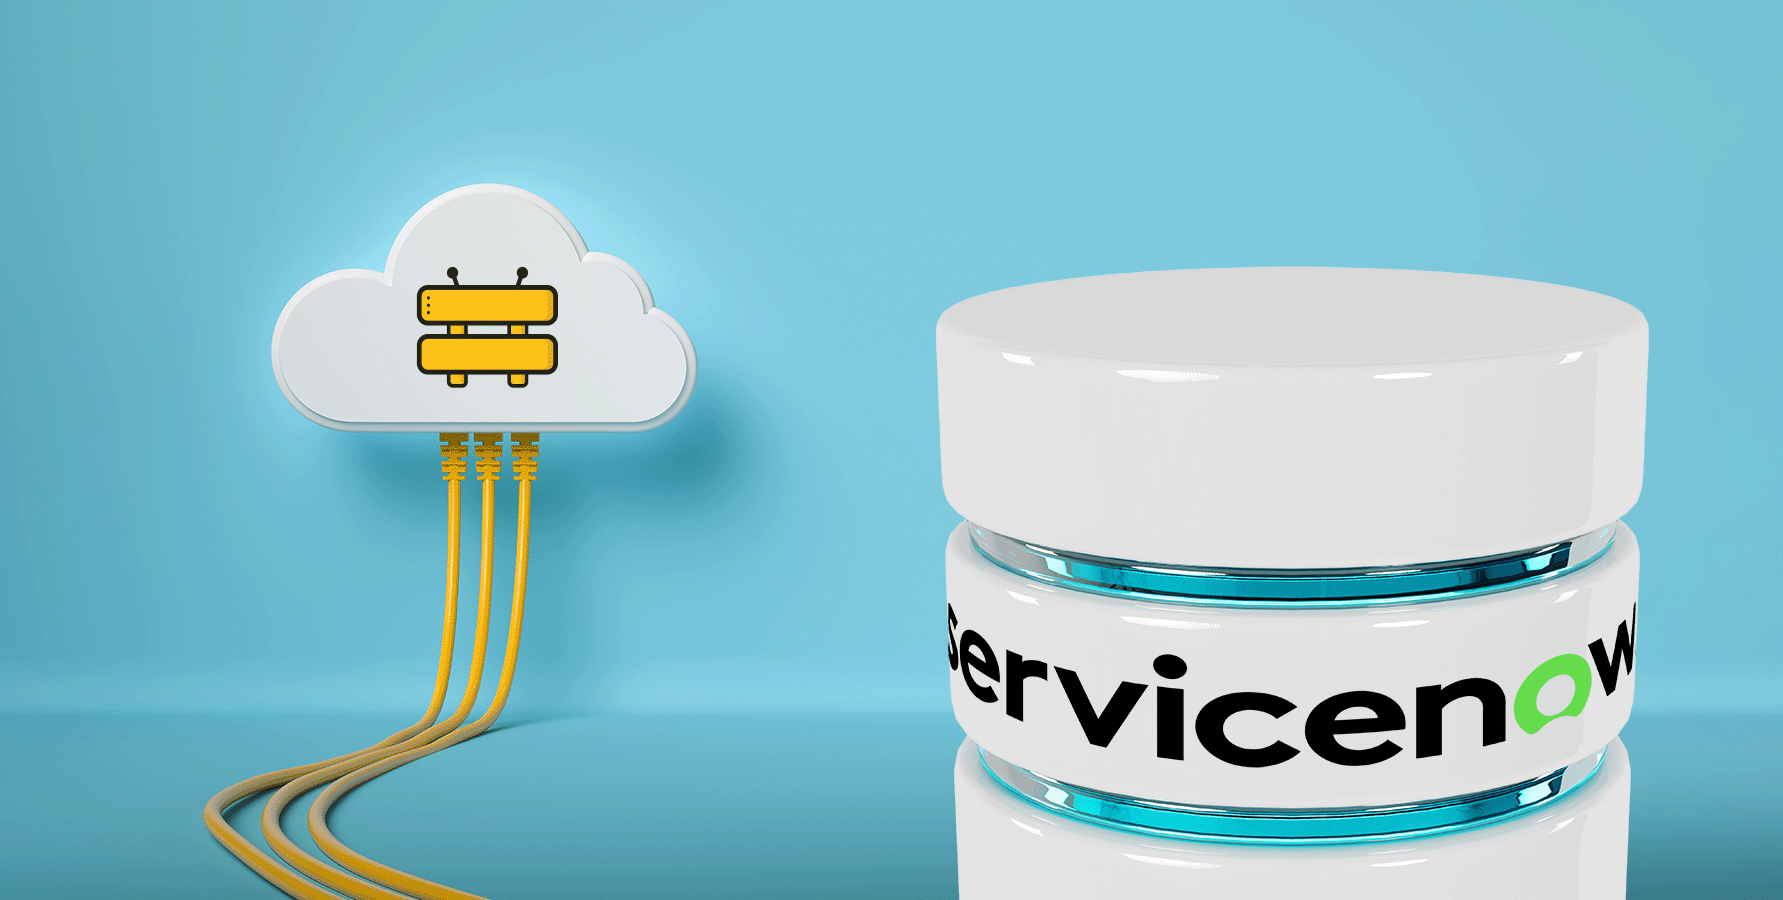 Supercharge your ServiceNow CMDB with real-time syncing of AWS, Azure, and GCP resources to increase visibility & accuracy.